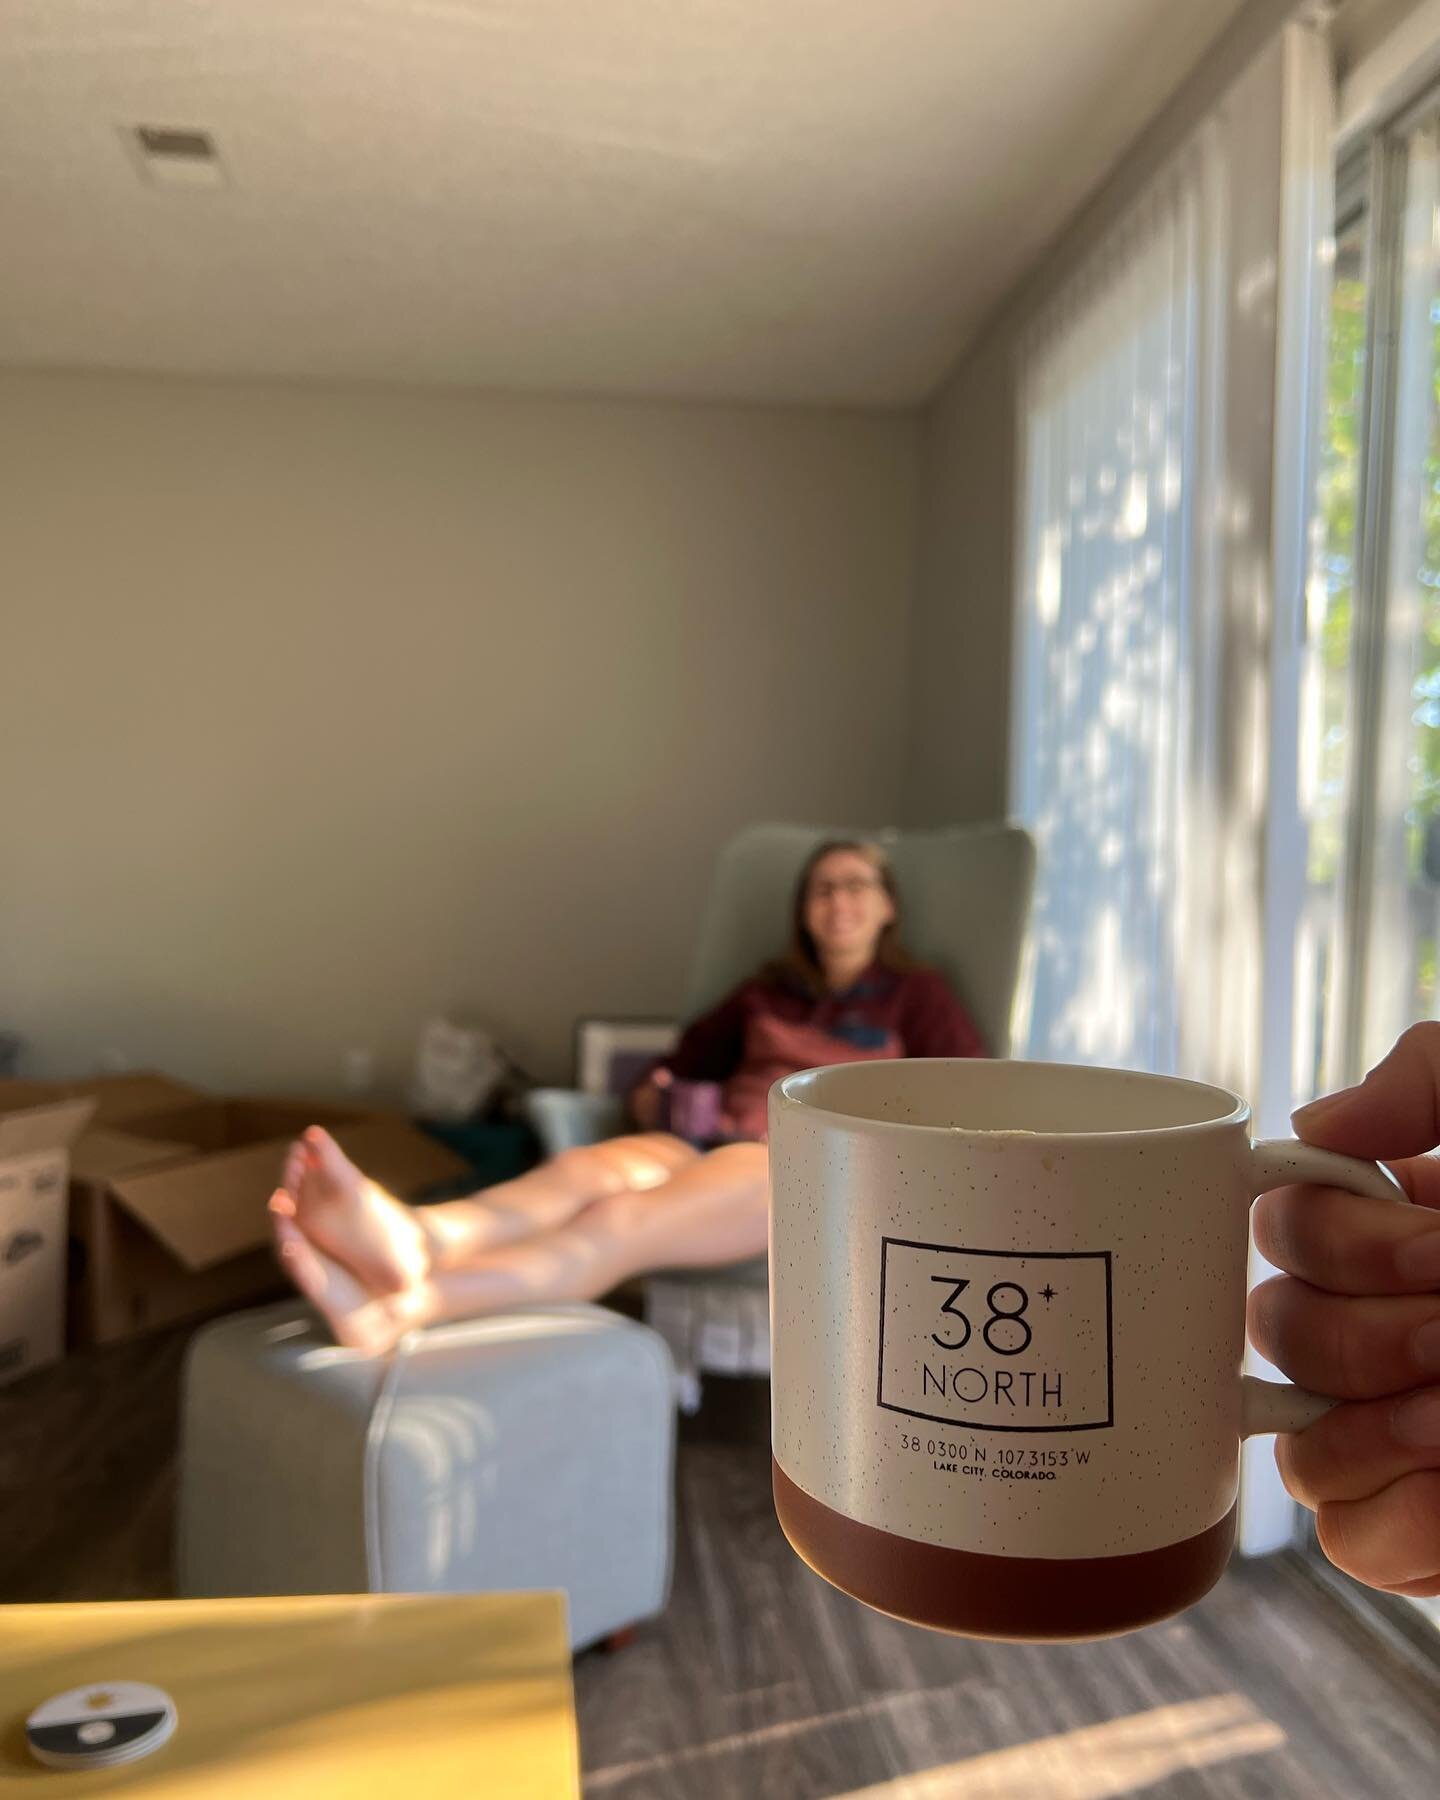 That first cup of coffee feel 

@mirandaeh_ | #38degreesnorthlc